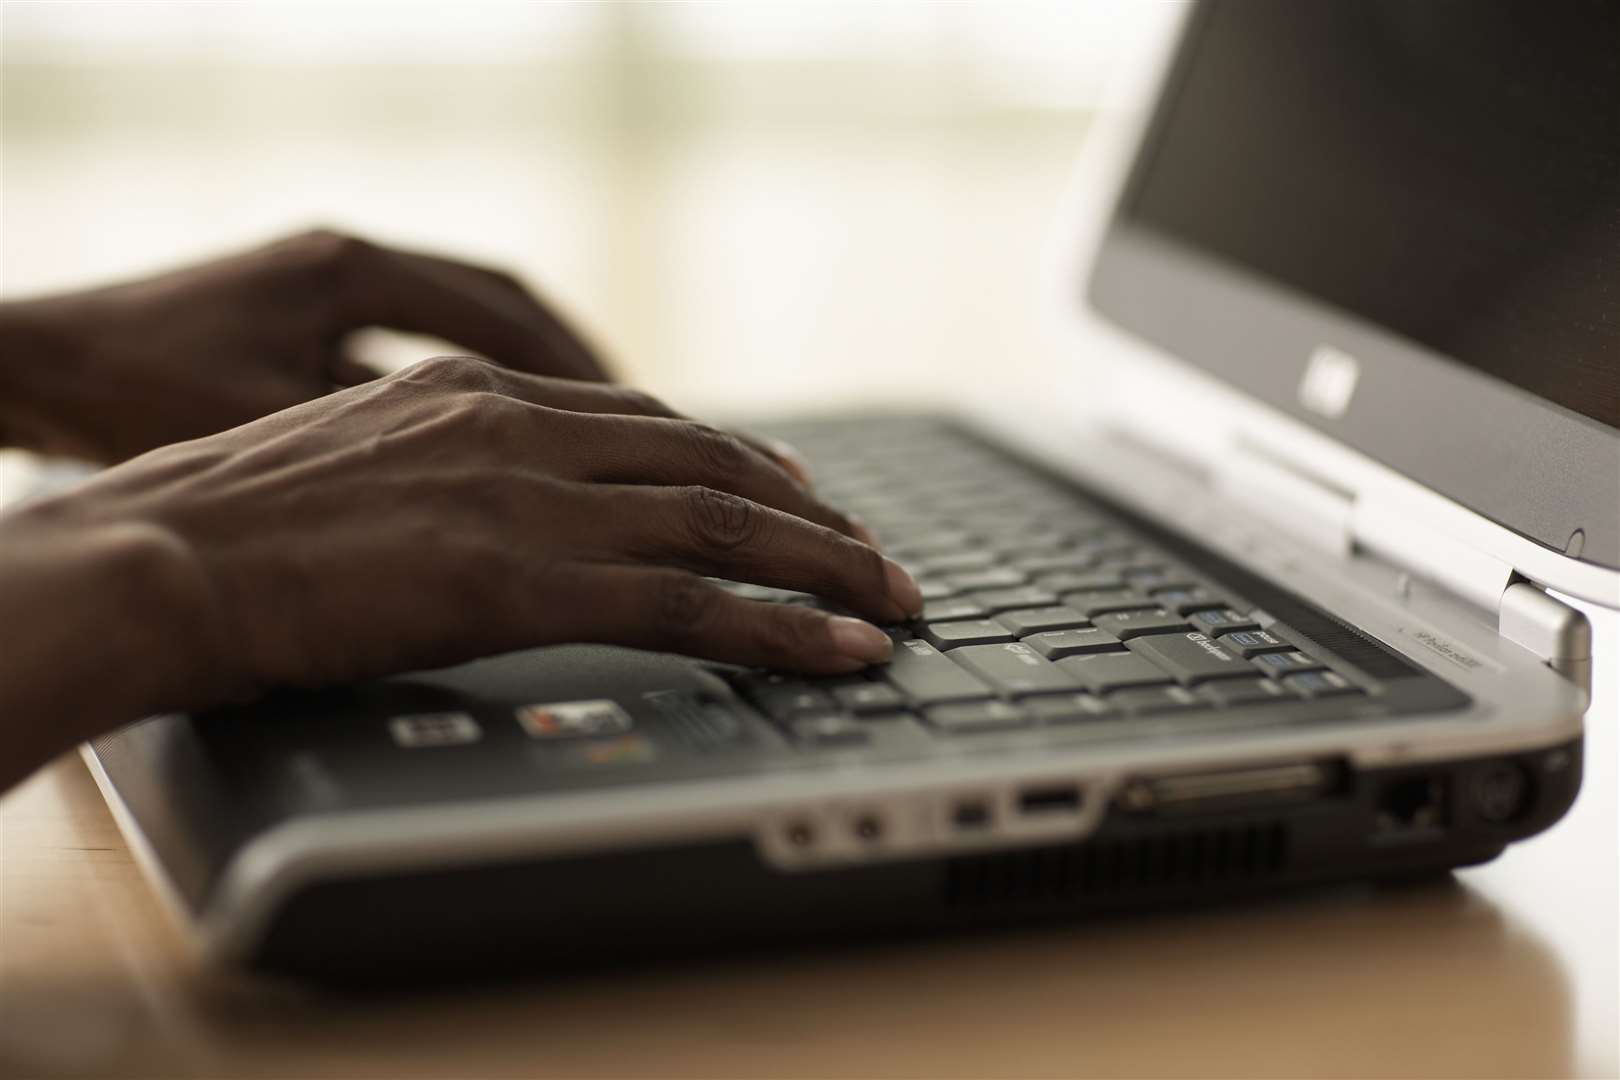 Senior woman using laptop, close-up of hands Silver surfer - stock image to accompany story on elderly computer classes (1011173)